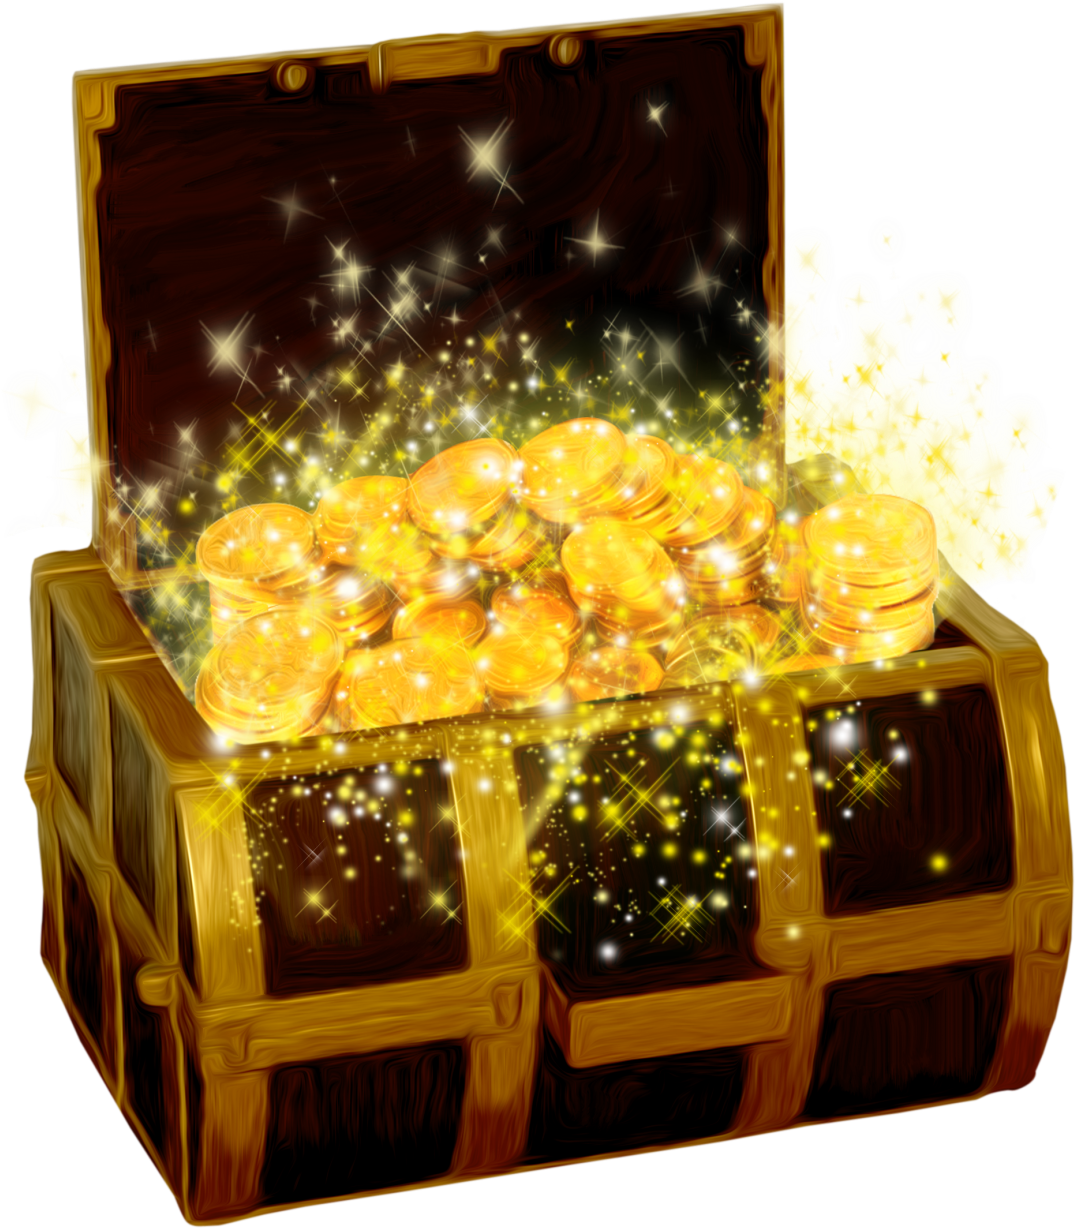 Glowing Treasure Chest Fullof Gold Coins PNG